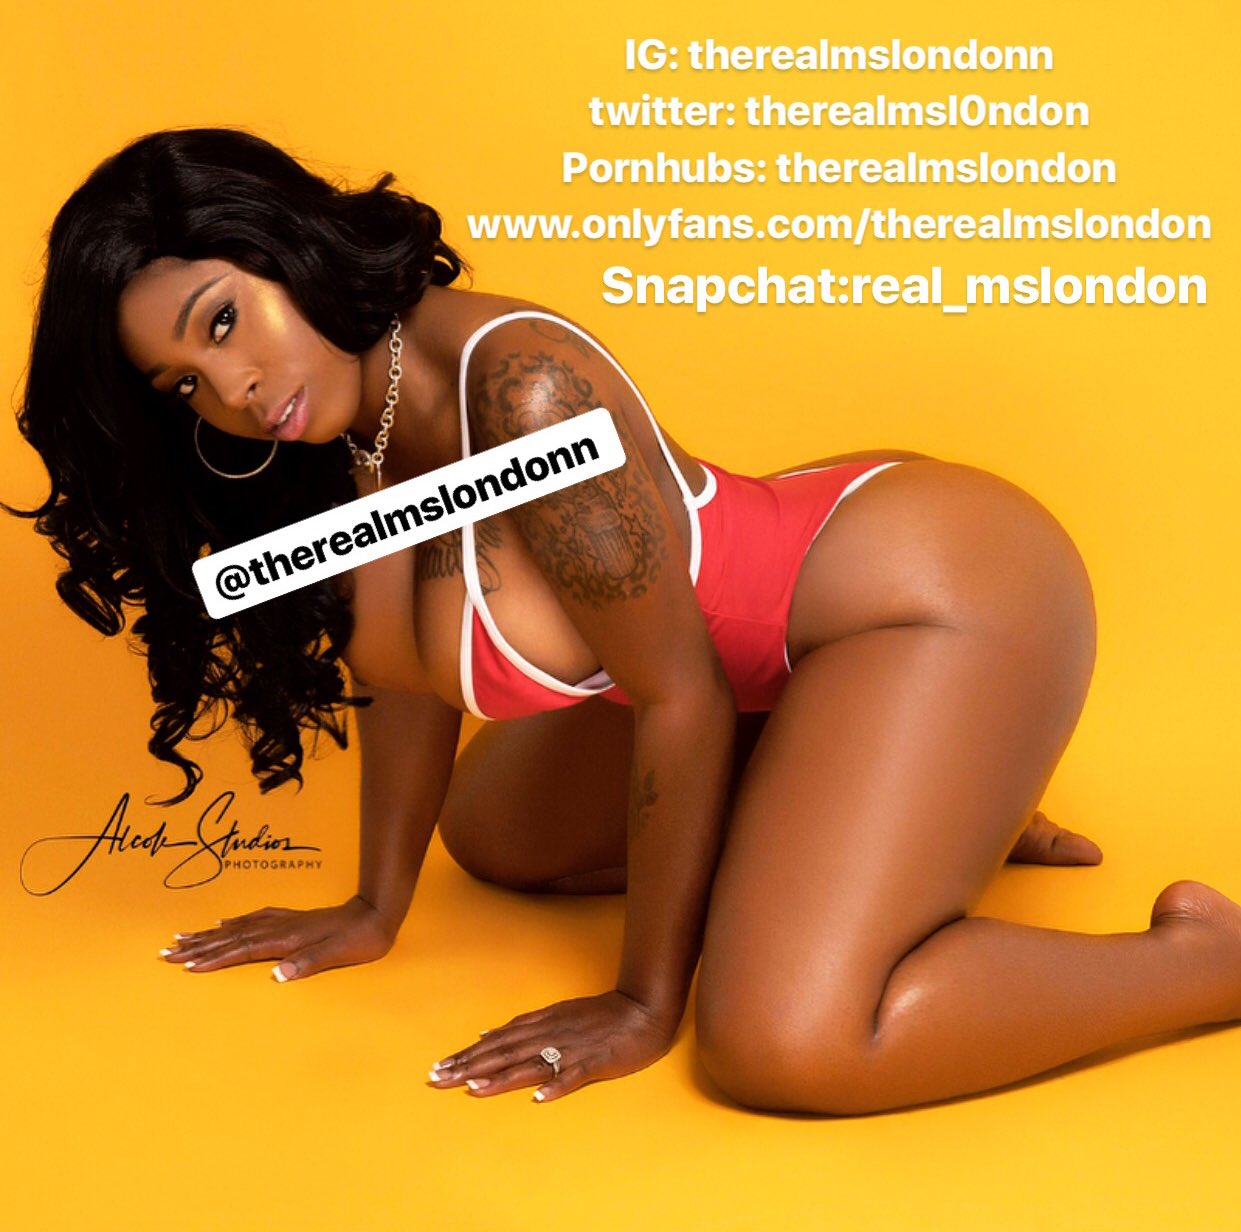 Granger reccomend igtherealmslondonn twitter therealmsl0ndon snapchat realmslondon